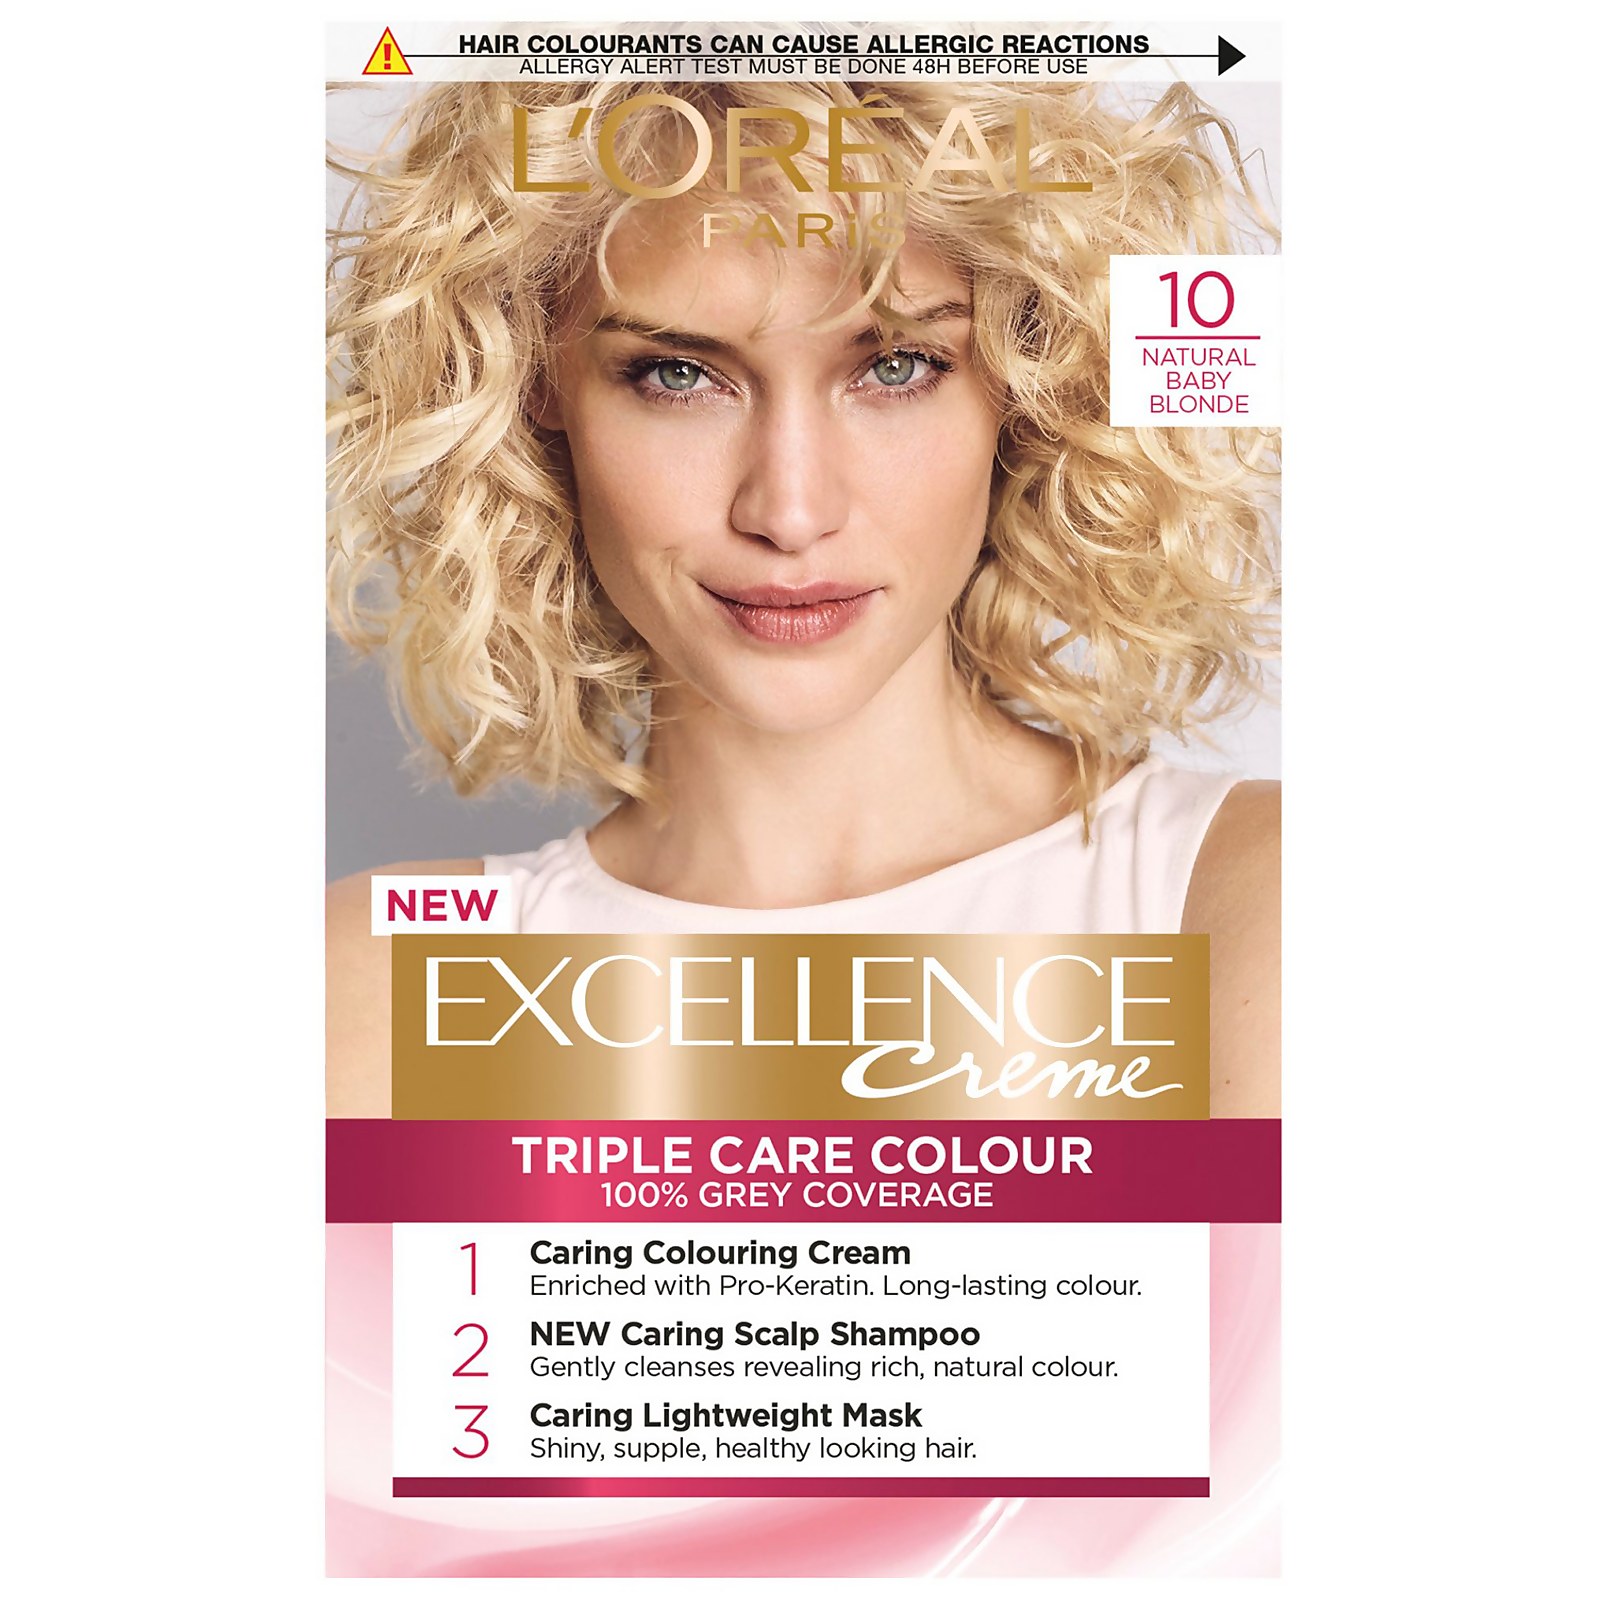 L'Oreal Paris Excellence Creme Permanent Hair Dye (Various Shades) - 10 Natural Baby Blonde